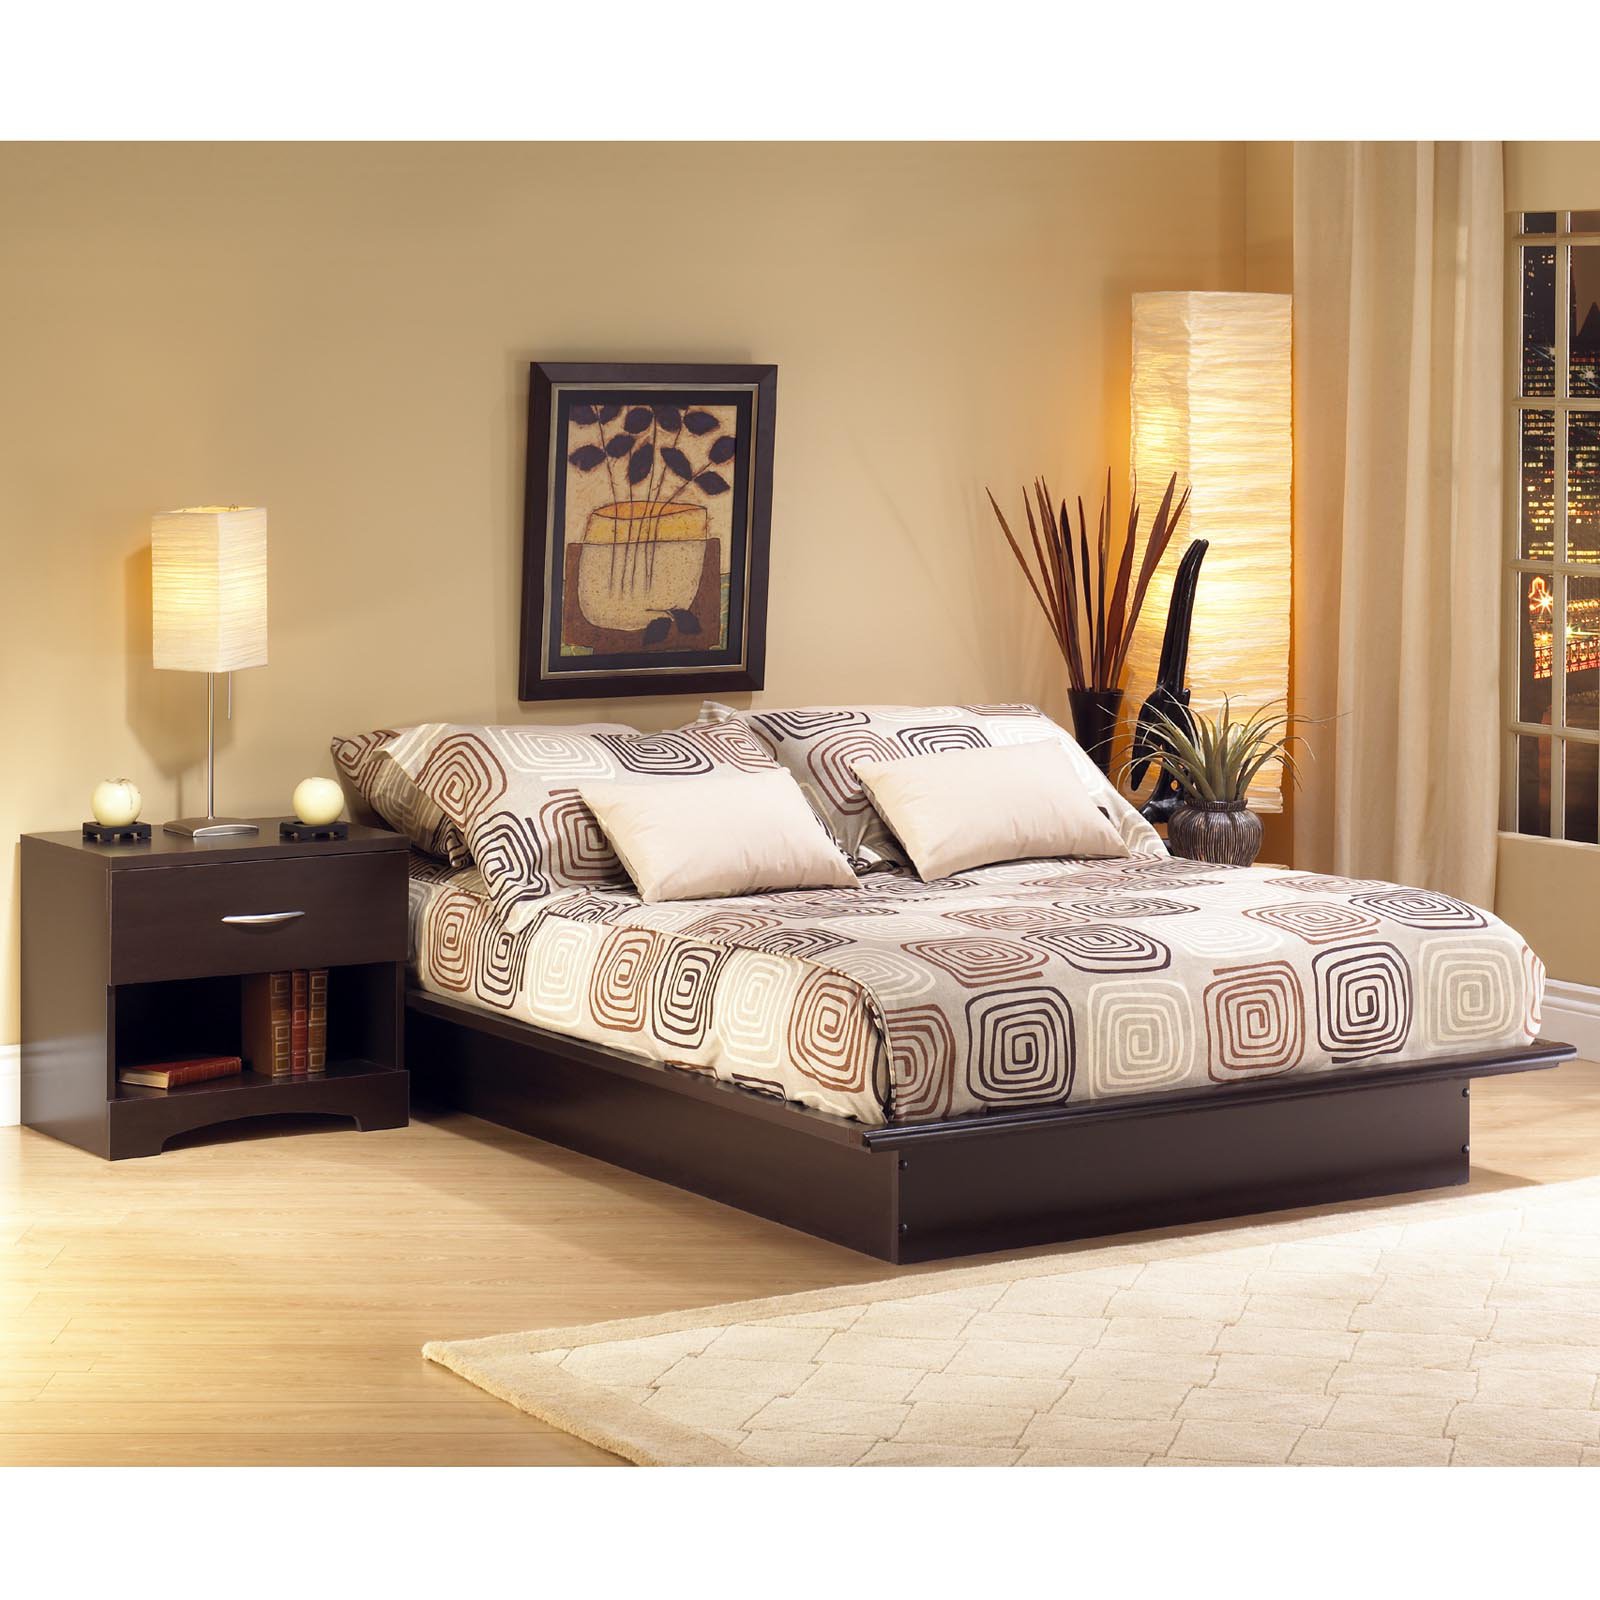 South Shore Basics Queen Platform Bed with Molding, 60'', Multiple Finishes - image 3 of 6